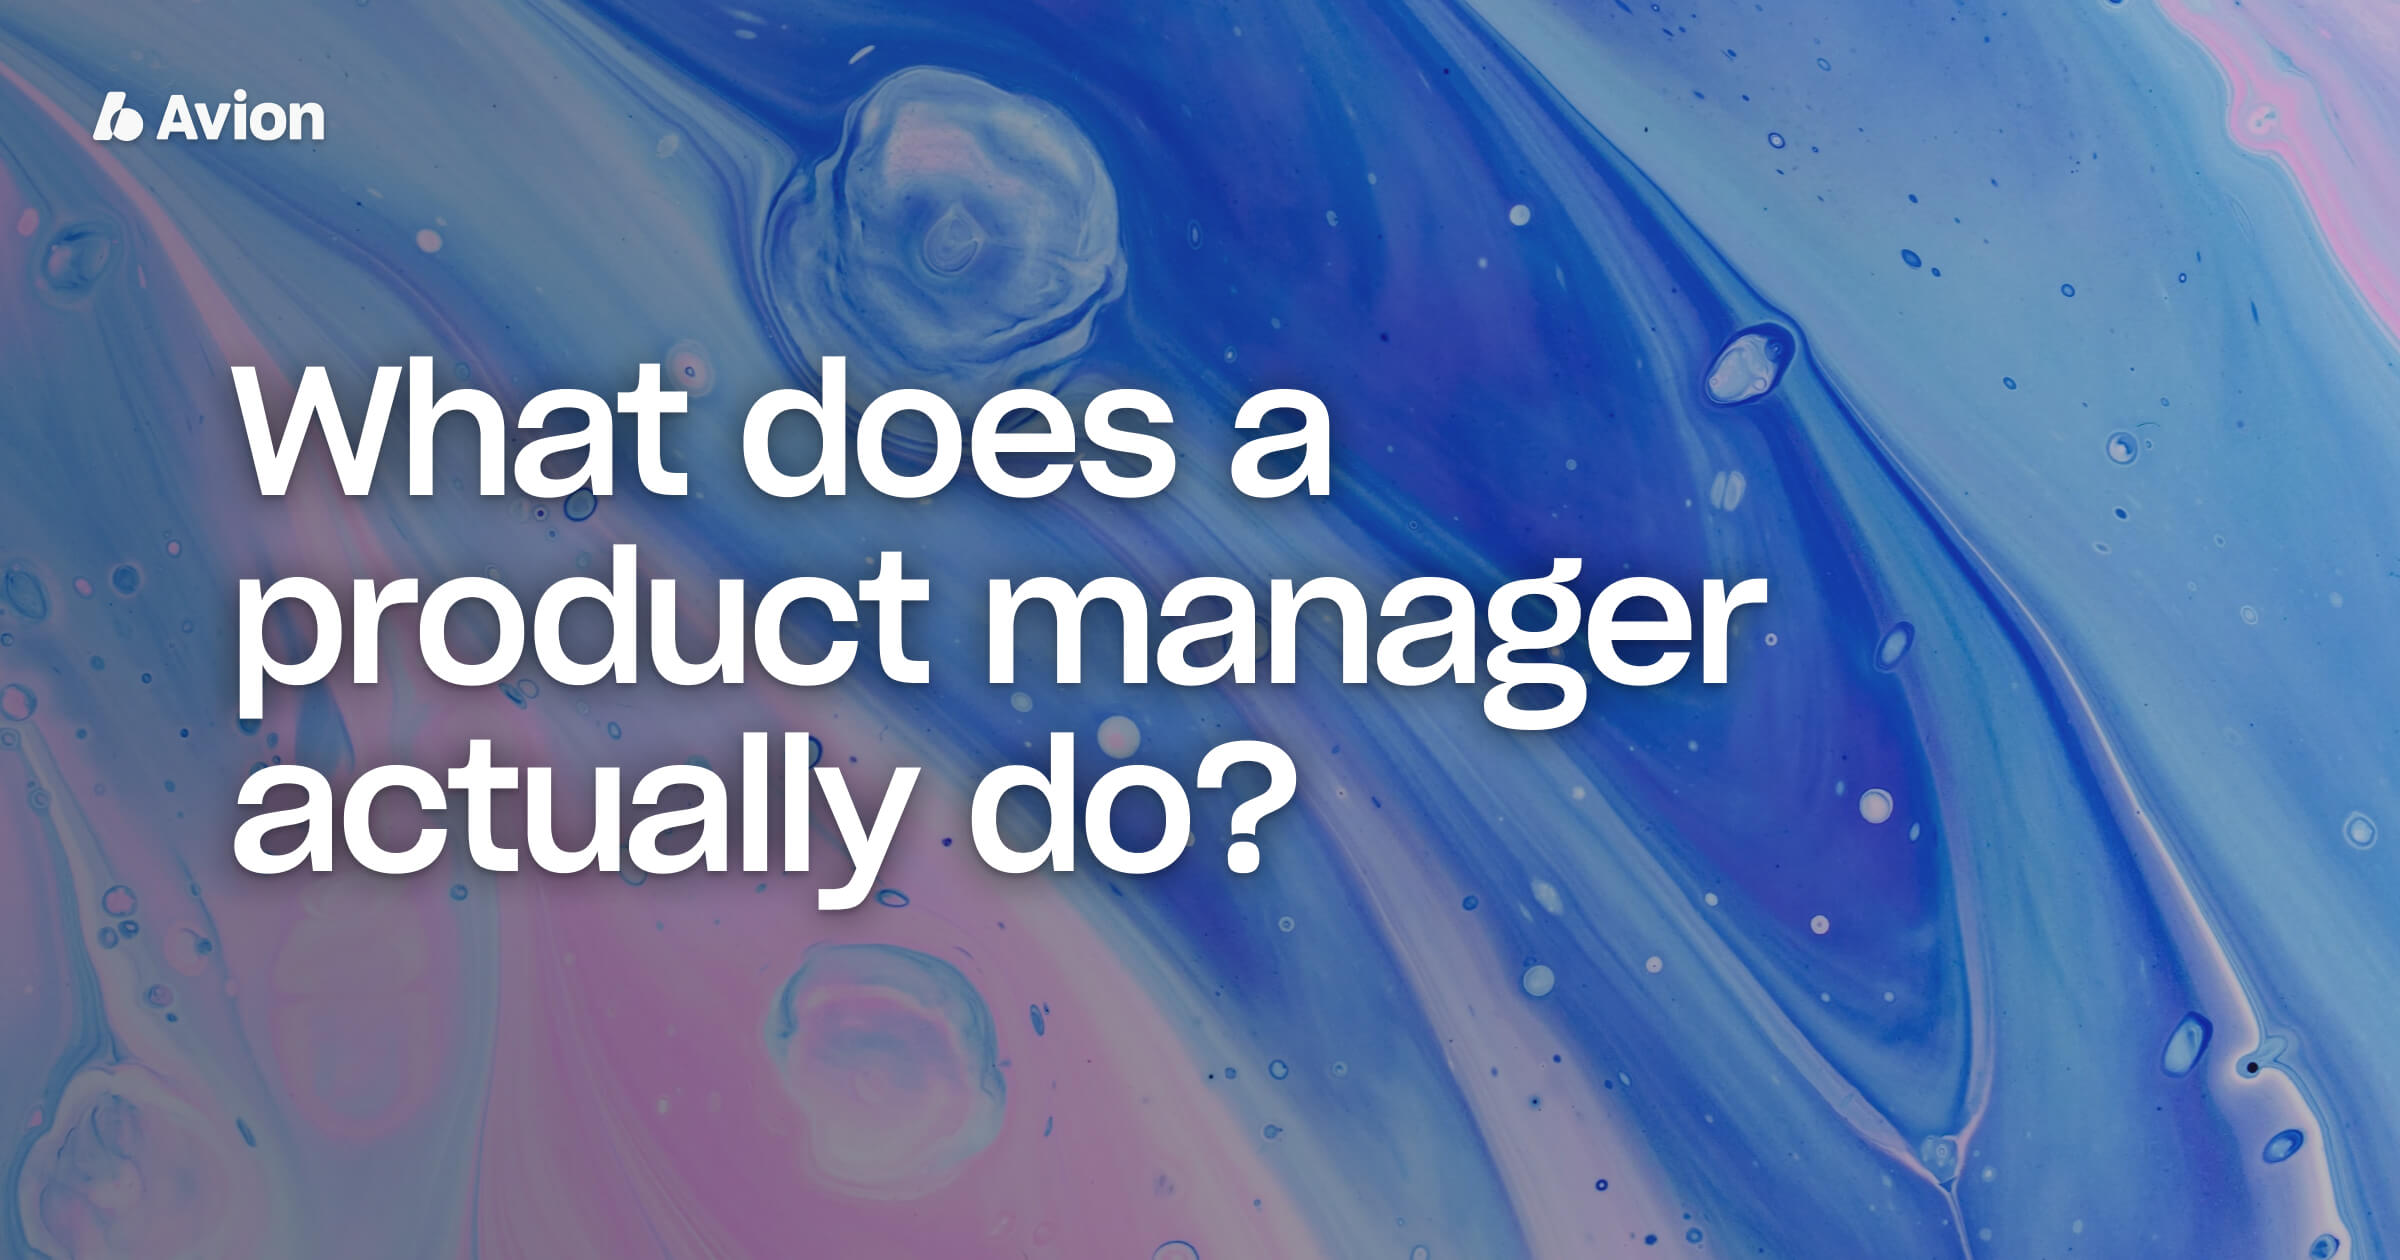 What does a product manager actually do?